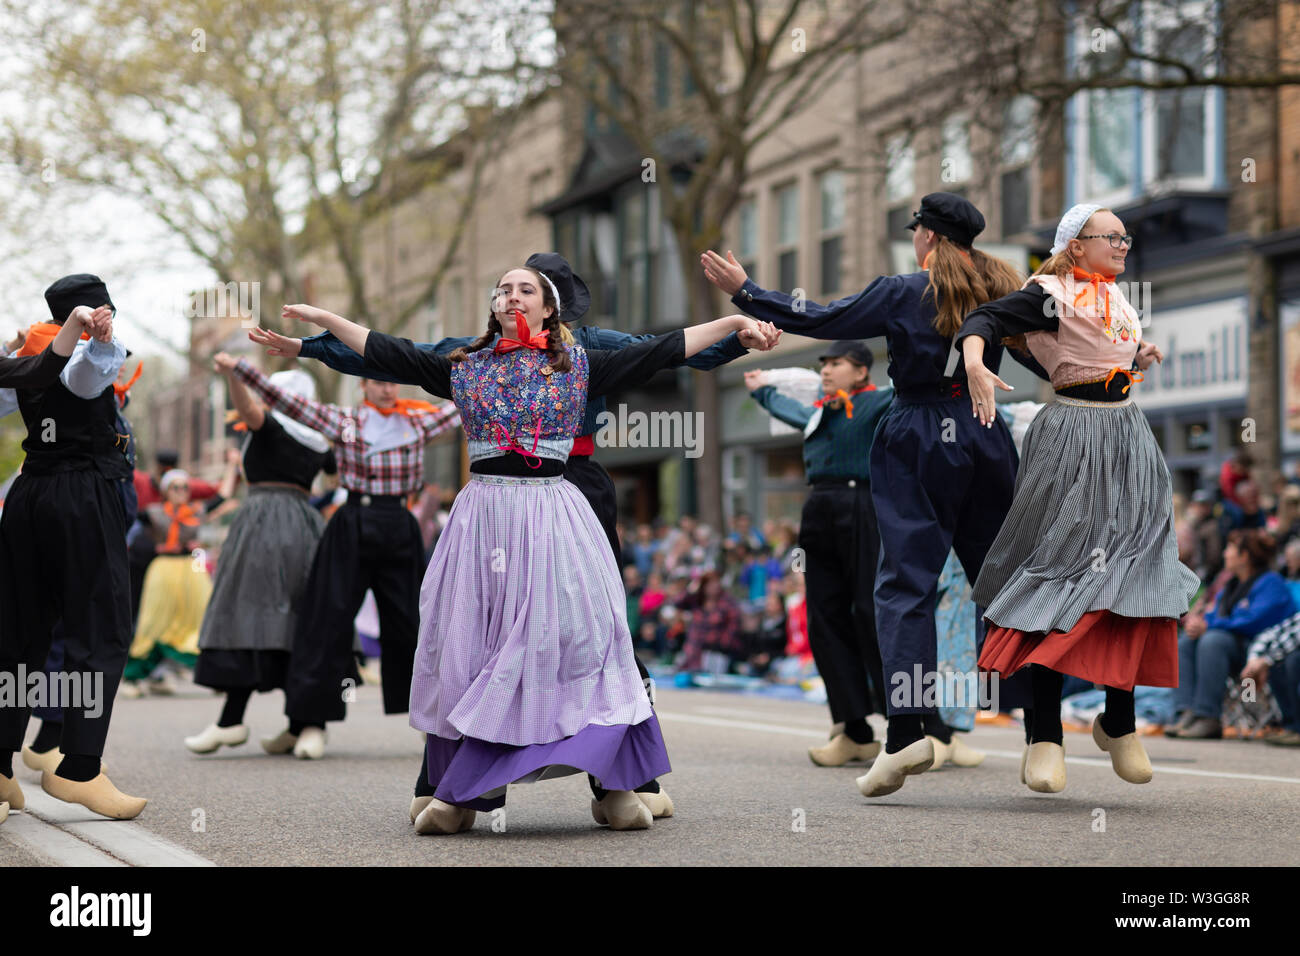 Holland, Michigan, USA - May 11, 2019: Tulip Time Festival, Young women ...